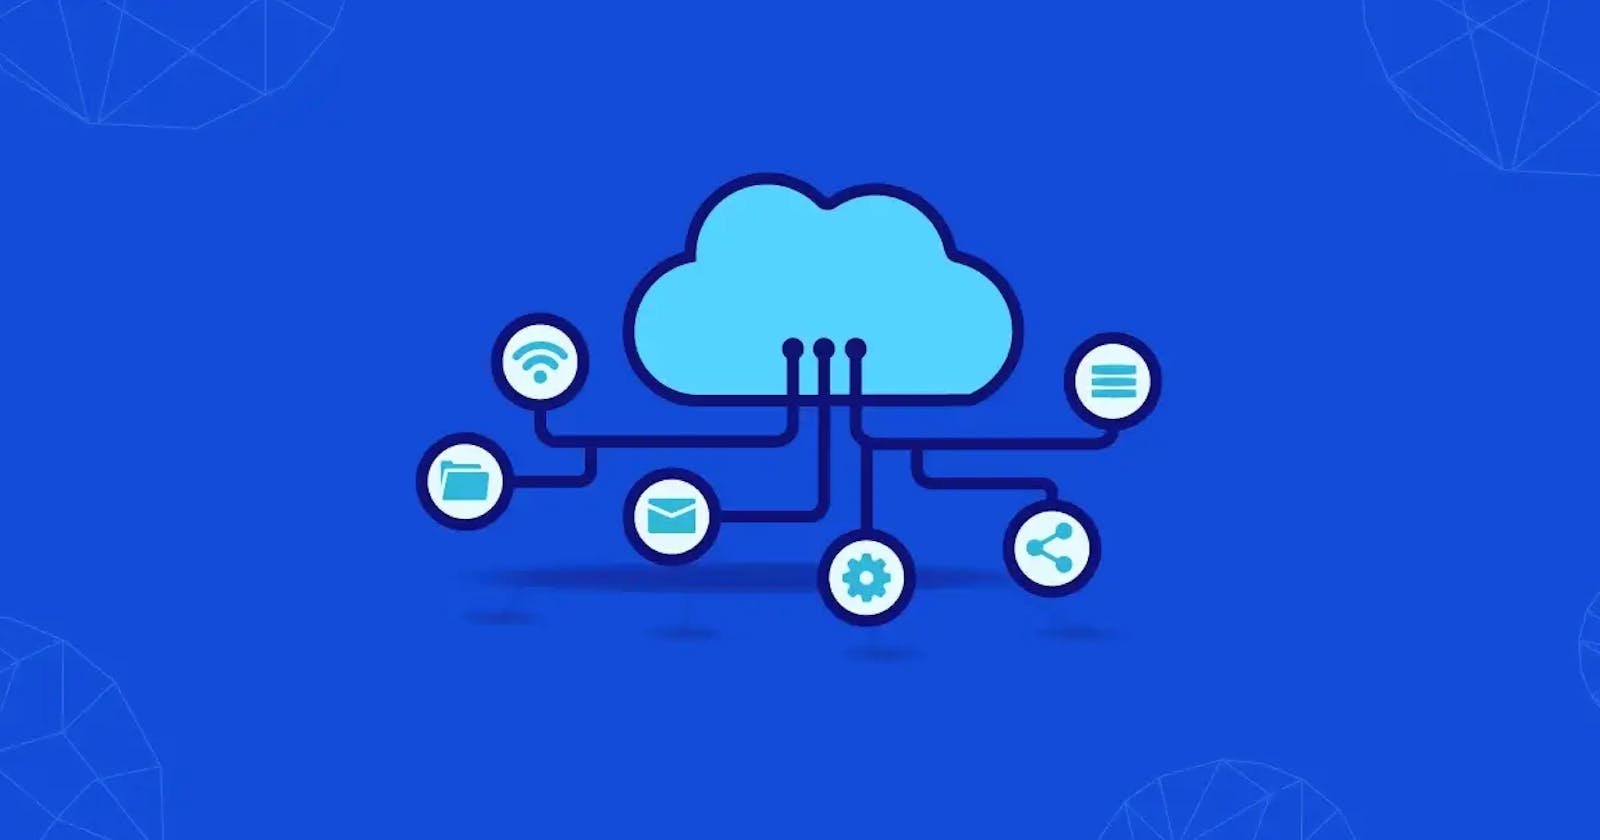 Understanding the basics of Cloud and Cloud Computing